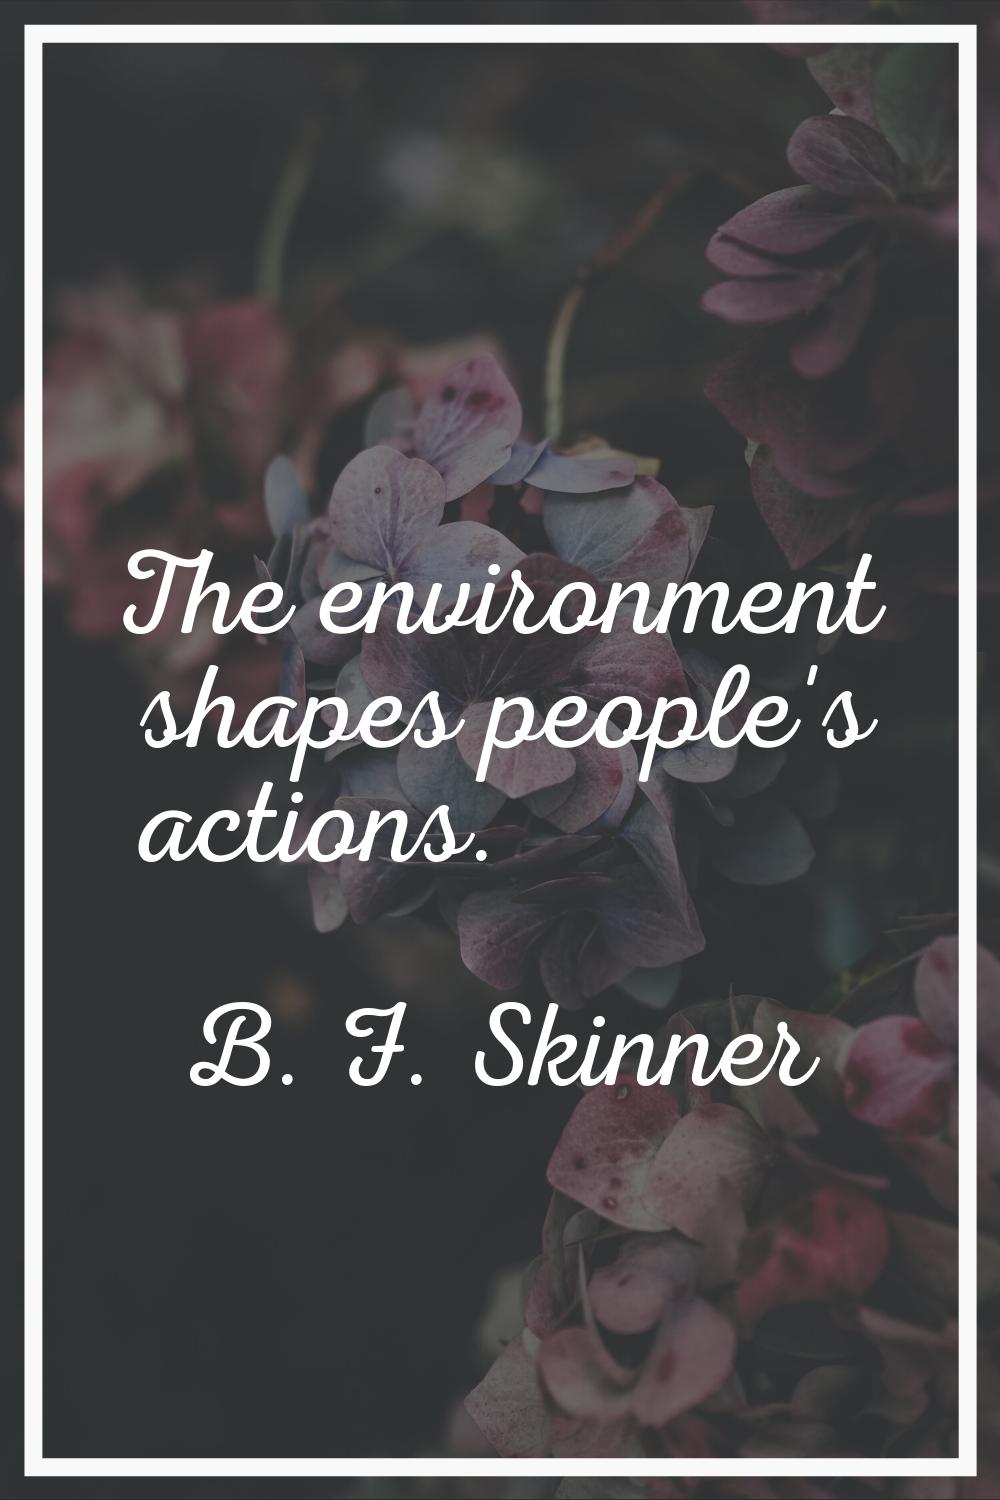 The environment shapes people's actions.